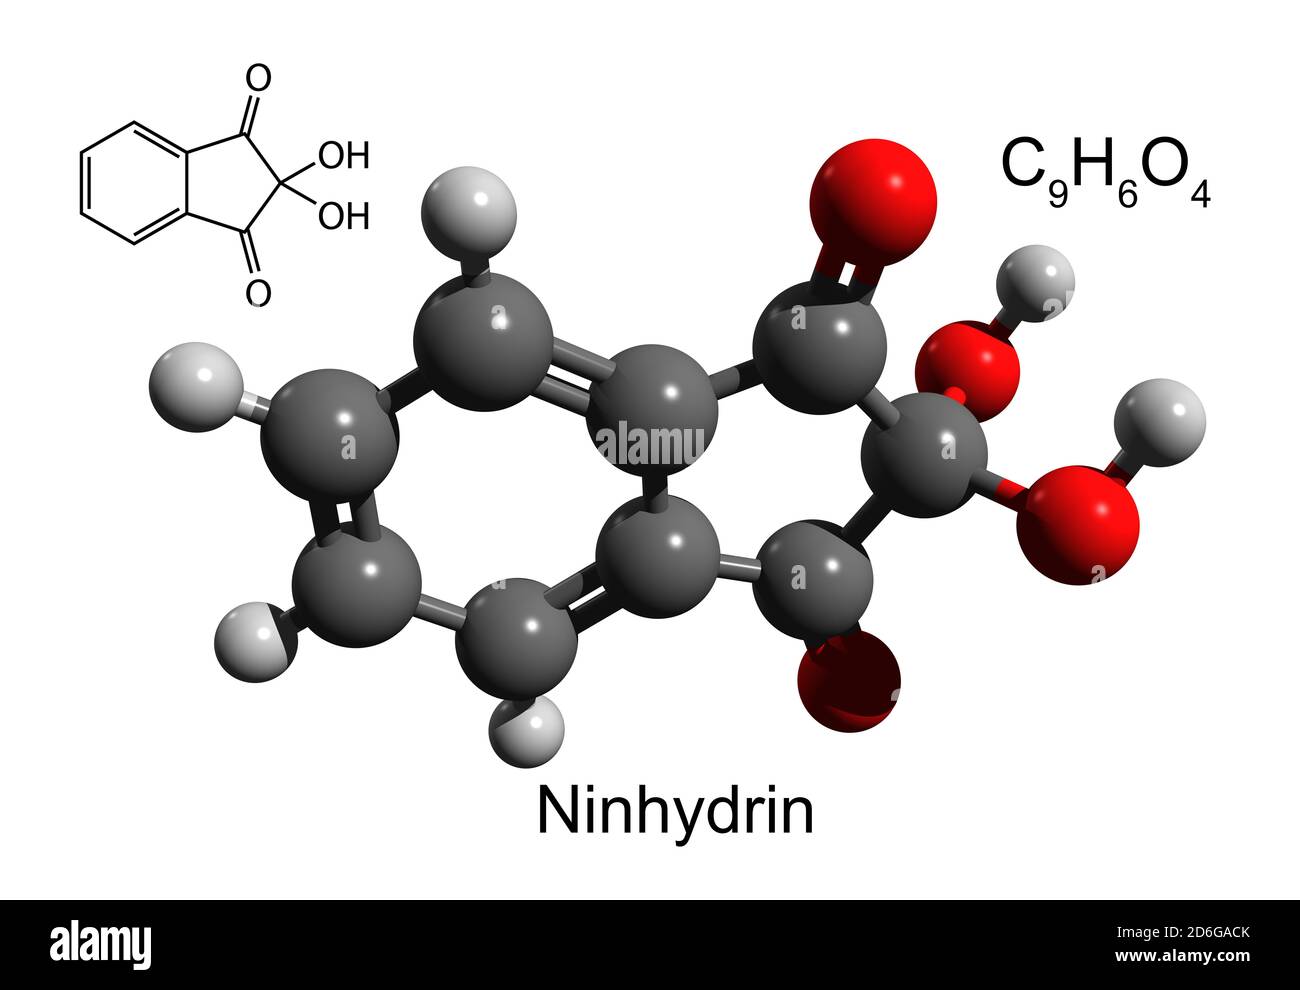 Chemical formula, structural formula and 3D ball-and-stick model of ninhydrin, a chemical used to detect ammonia or primary and secondary amines Stock Photo